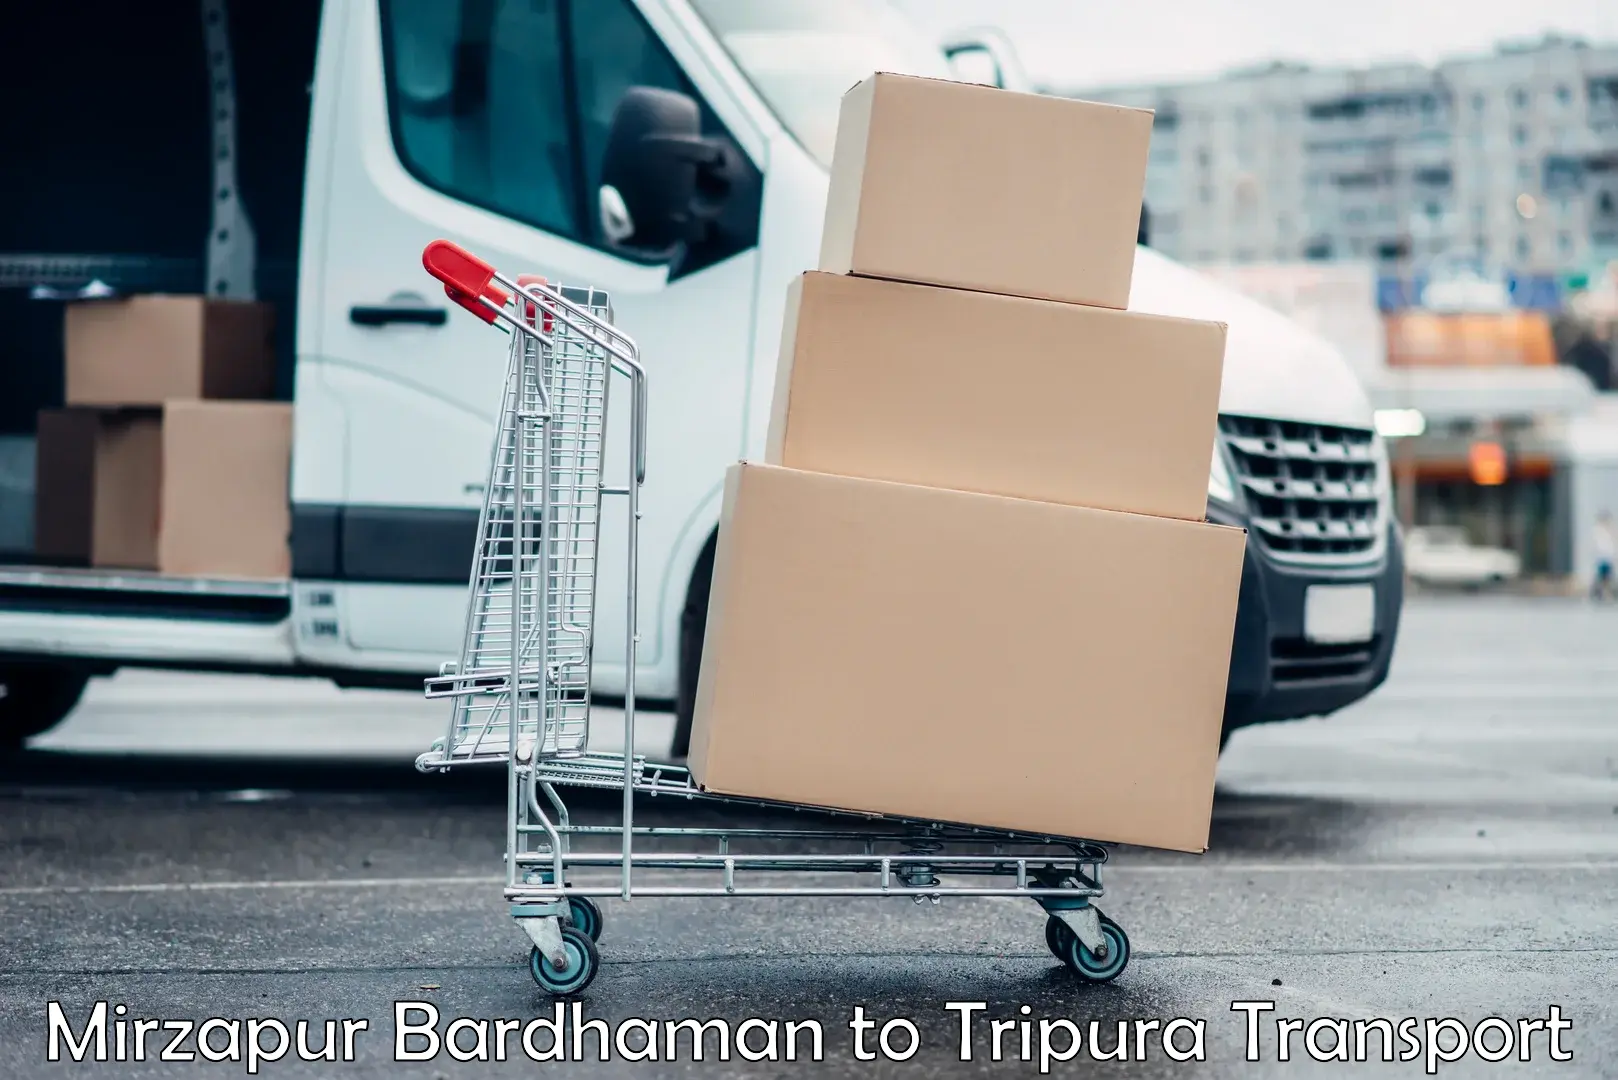 Commercial transport service Mirzapur Bardhaman to Tripura